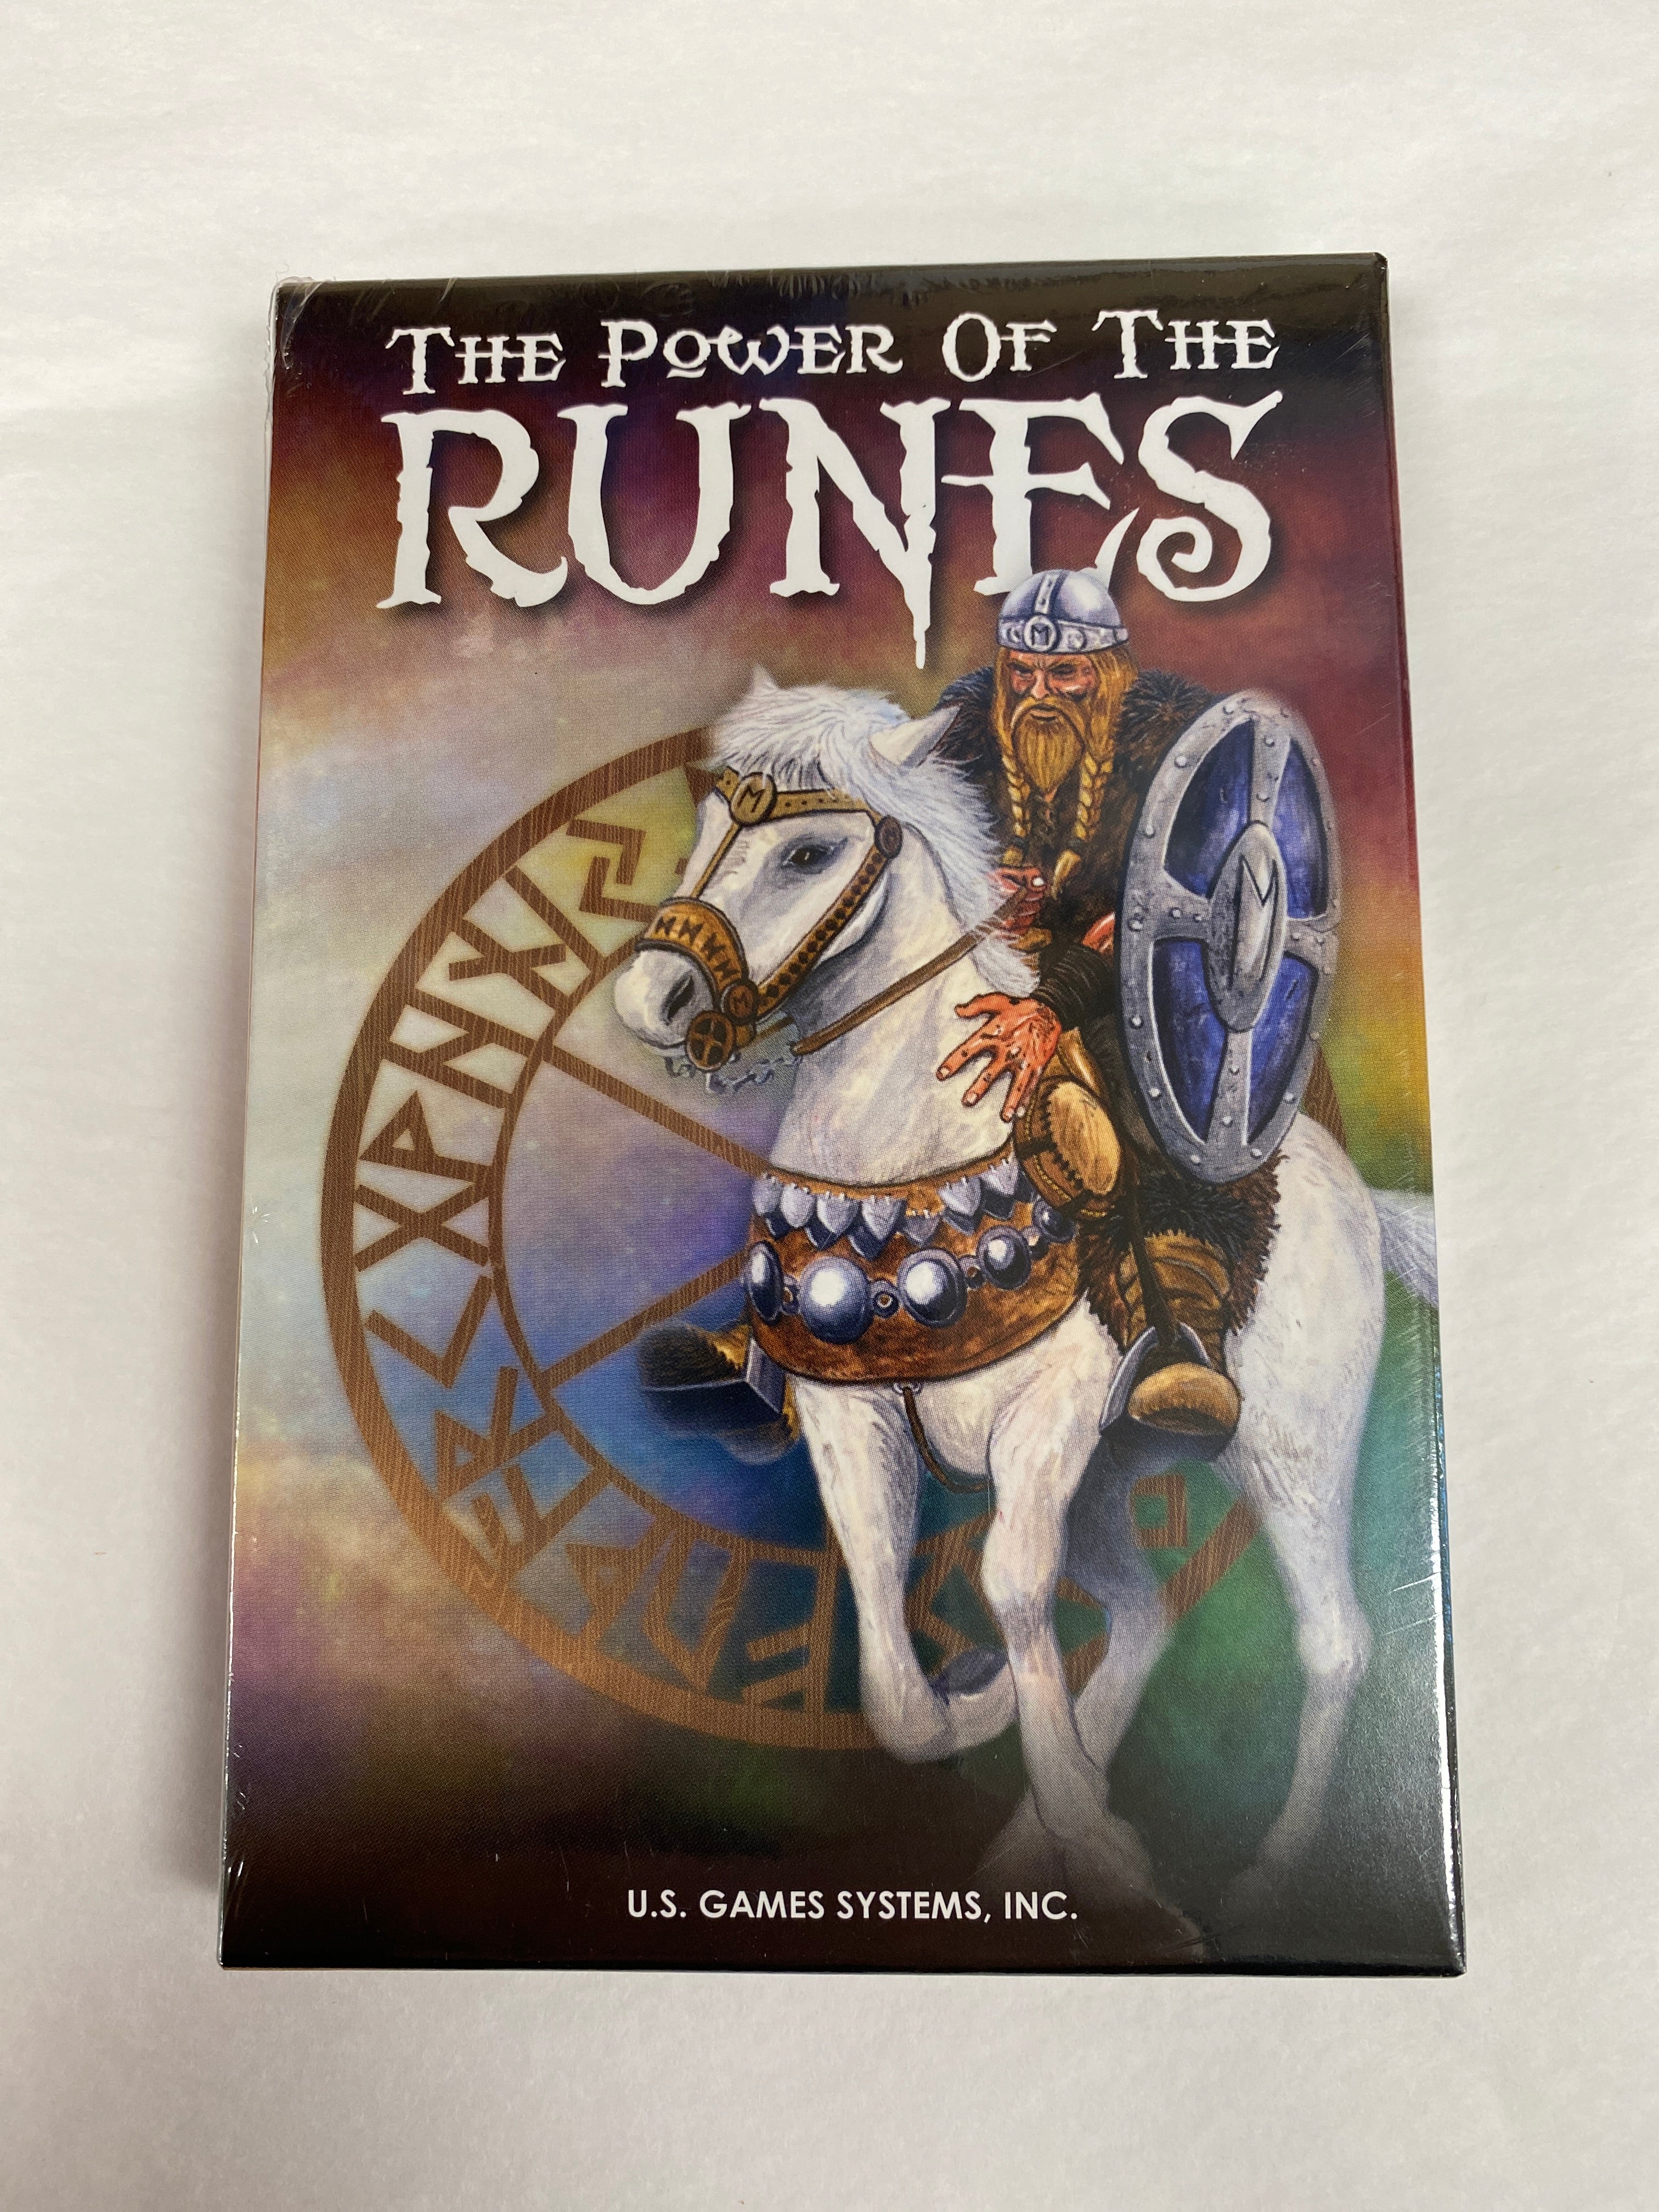 Power of the Runes Oracle Cards